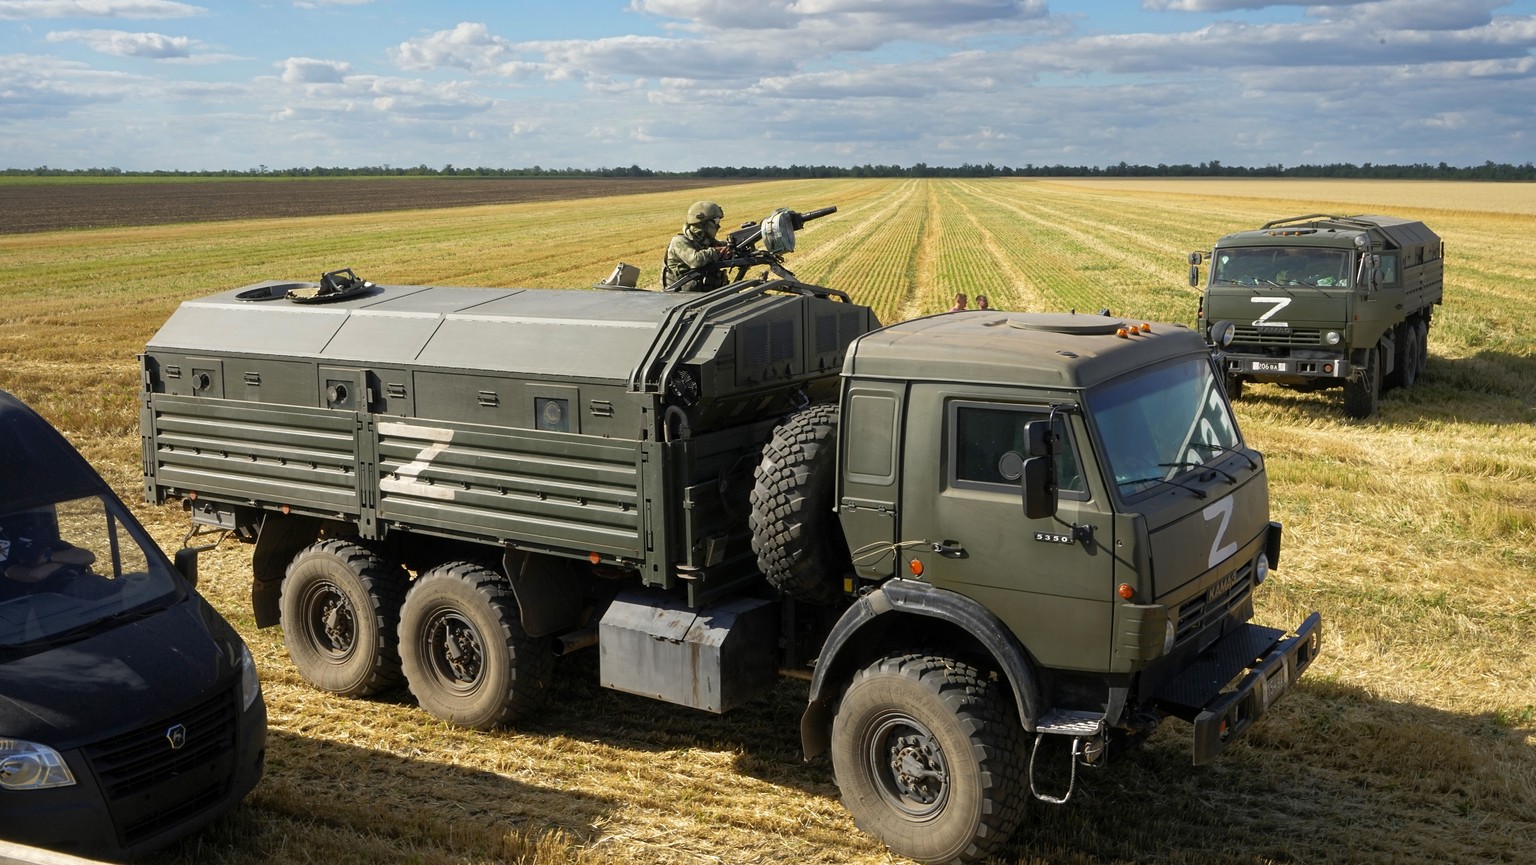 FILE - During a trip organized by the Russian Ministry of Defense, a Russian soldier stands guard atop a military truck as foreign journalists observe farmers at the Voznesenka-Agro farm harvest grain ...